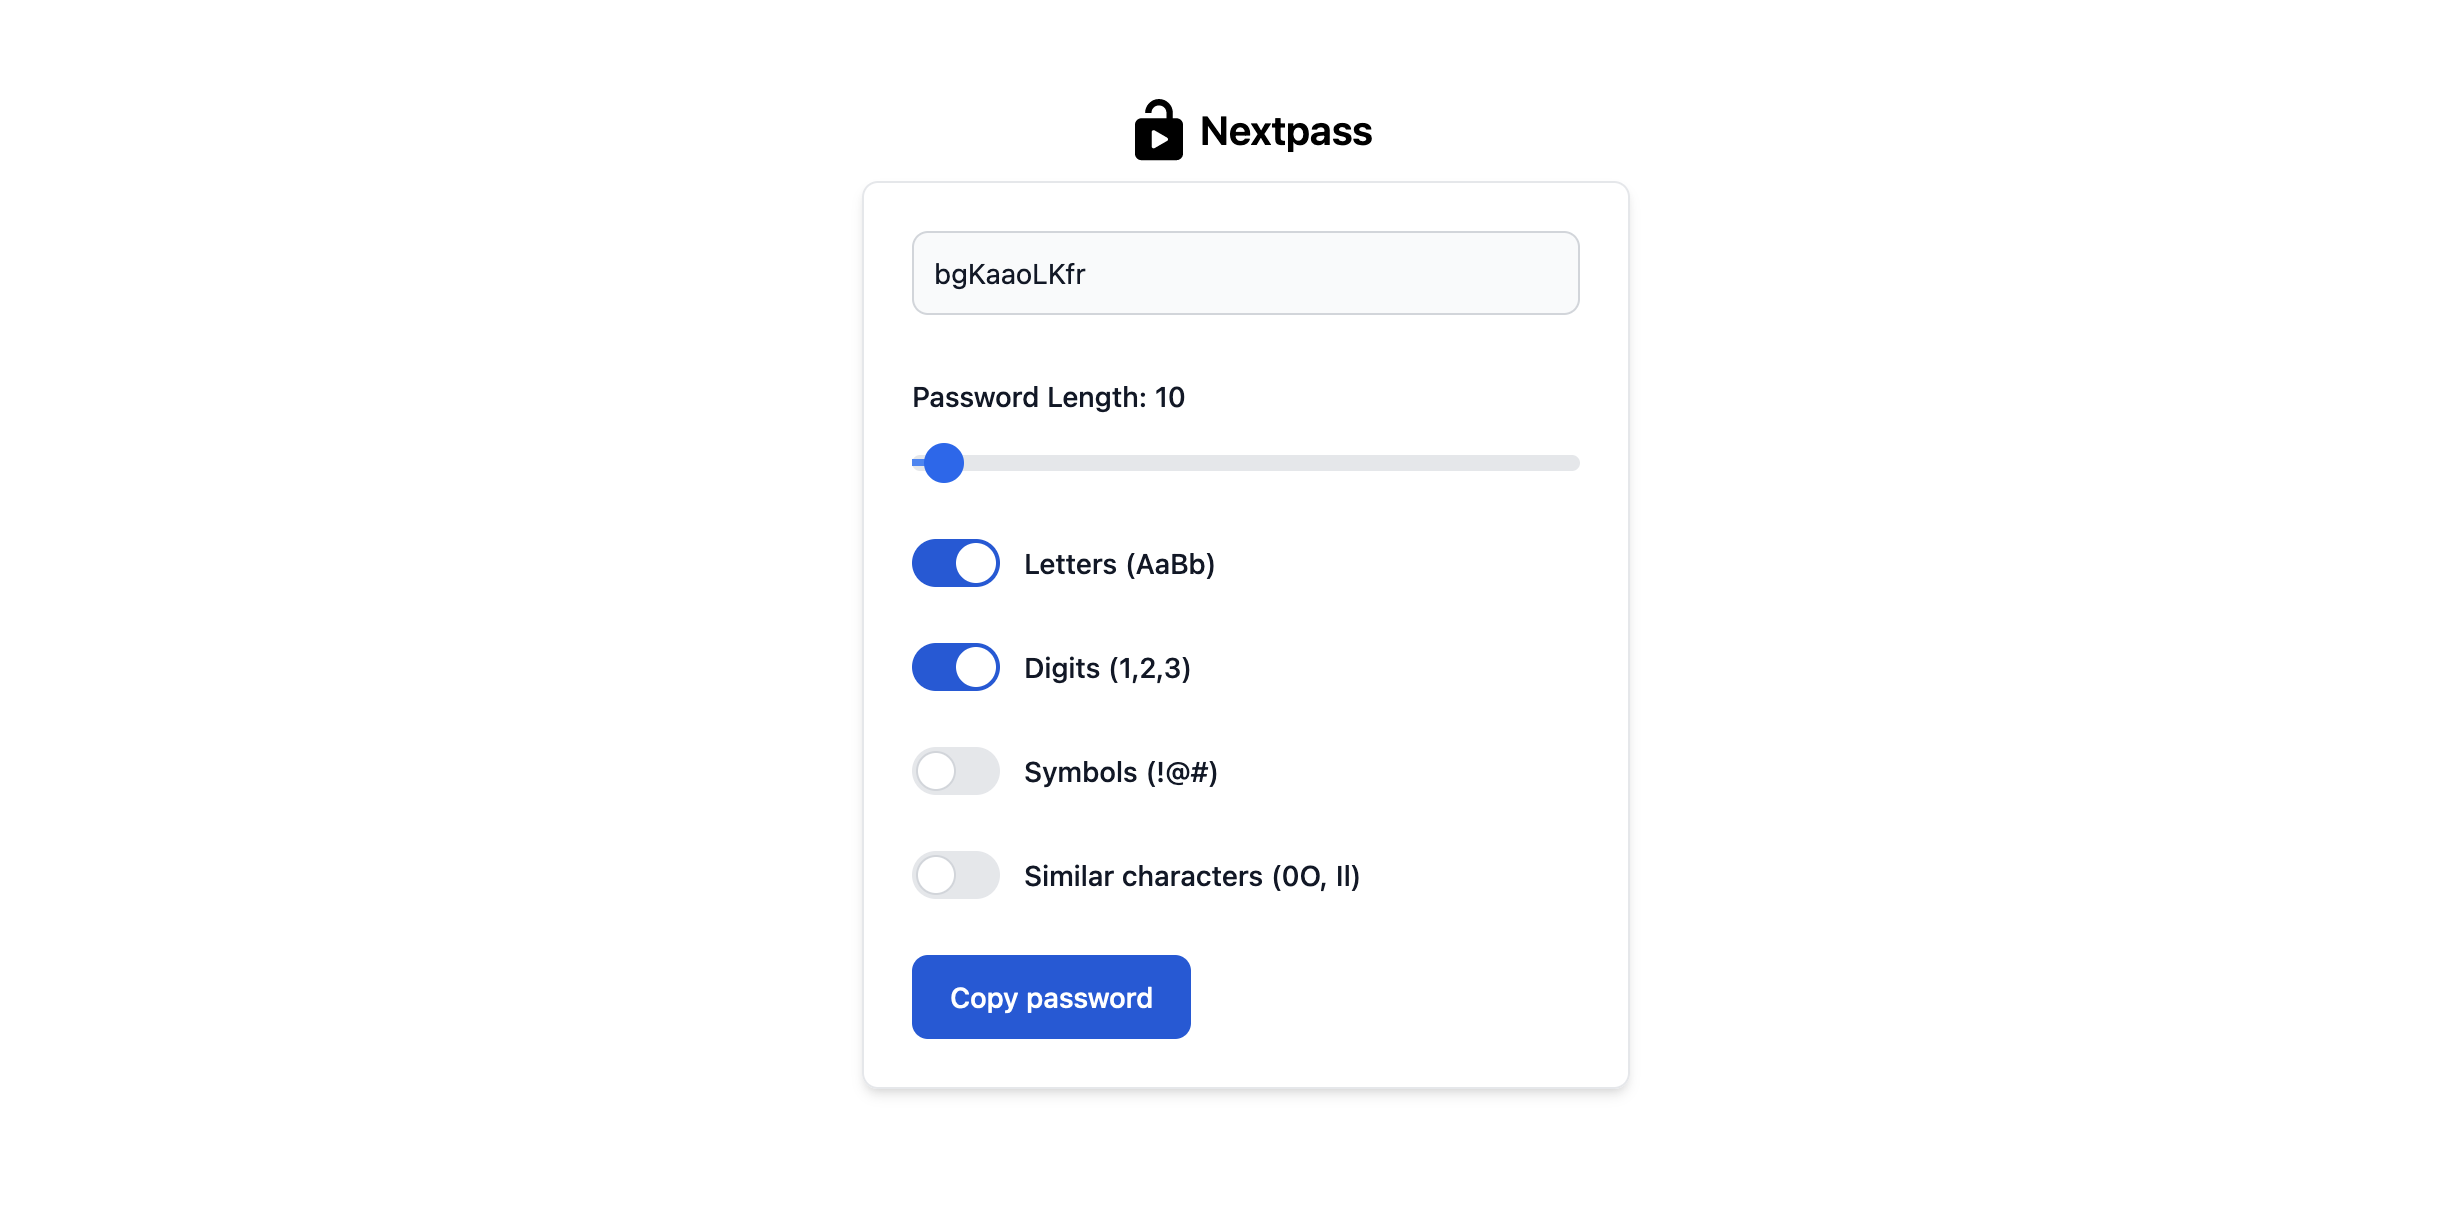 A screenshot of the Nextpass application. On screen is a form with 4 different controls. Letters, Digits, Symbols, and Similar Characters are the options displayed. At the top of the form is an input field with a random password. Beneath the form is a range slider to adjust the password length. A 'copy password' button is present at the bottom of the form.